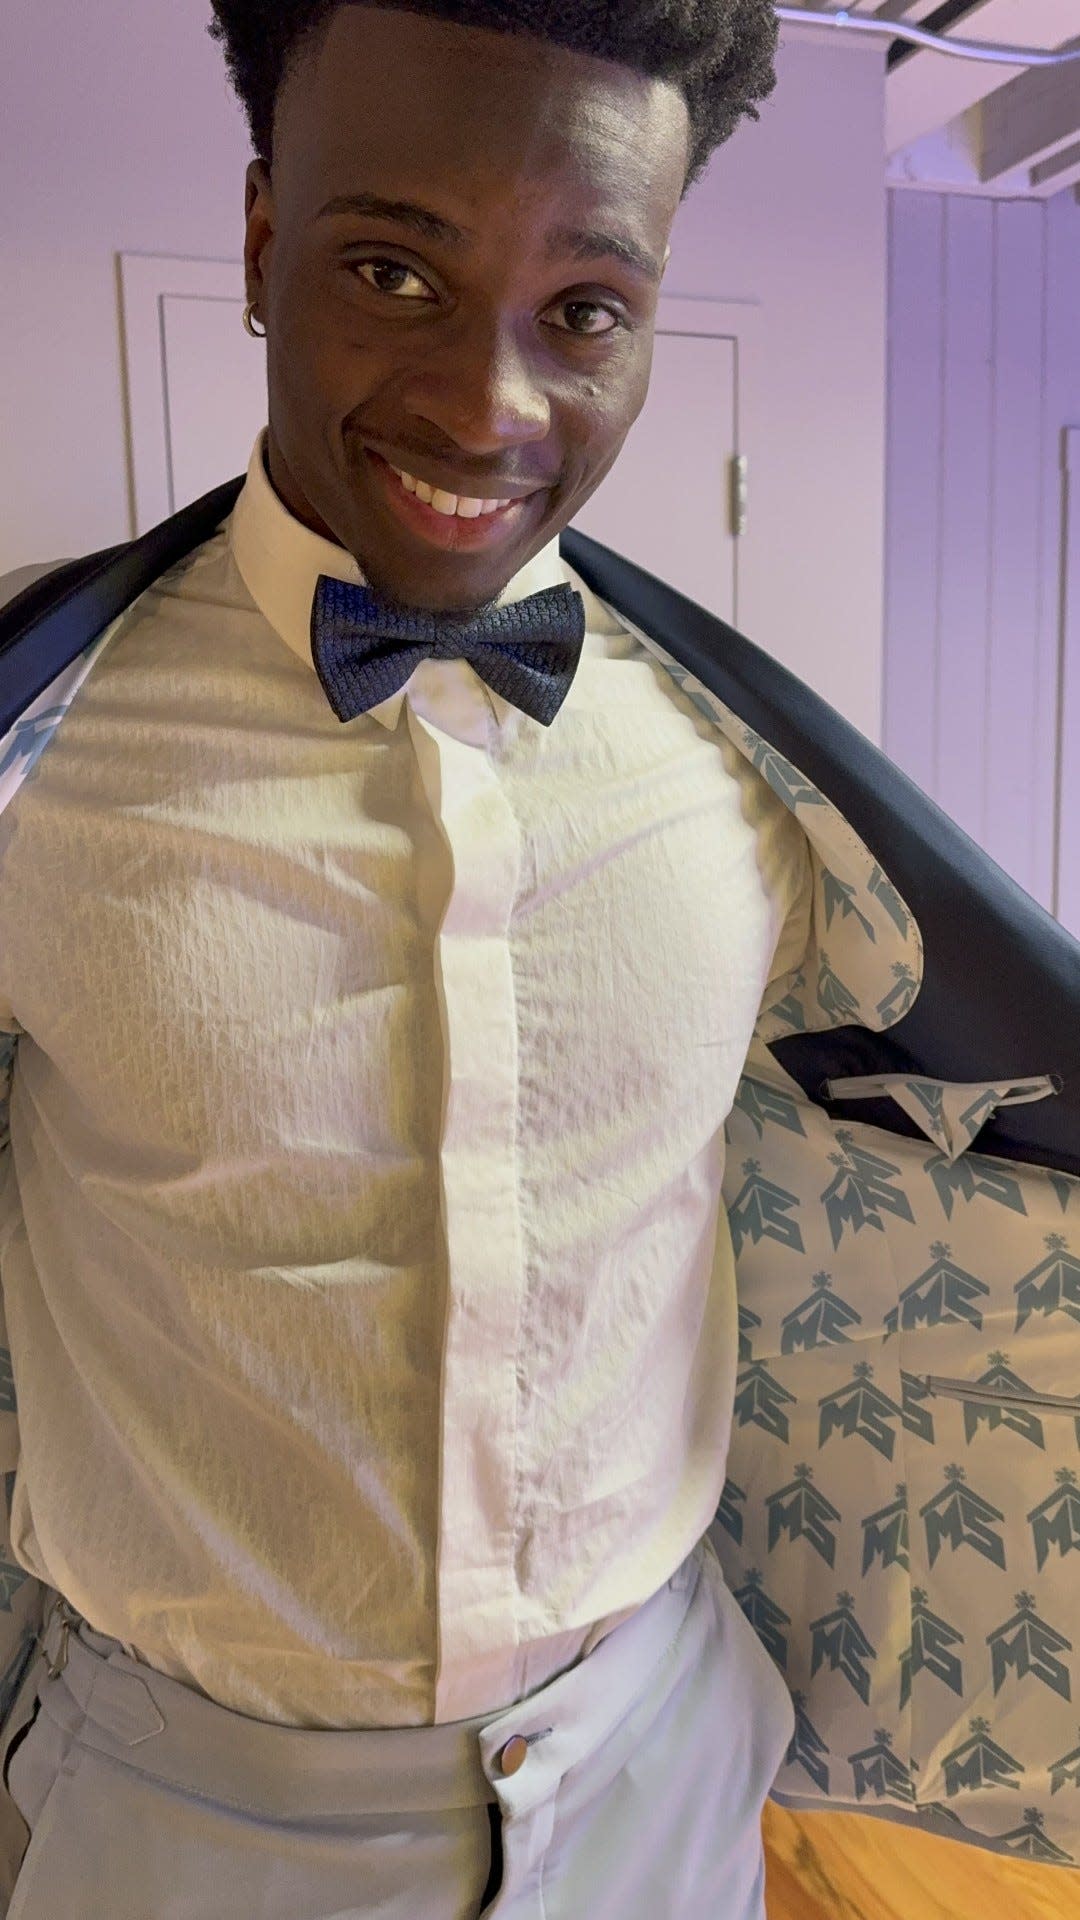 Mike Sainristil, coming from the 2024 national champion University of Michigan Wolverines, shows off a custom suit with lining that bears a design around his initials at a draft party Thursday, April 25 at a private event space in n Ann Arbor.